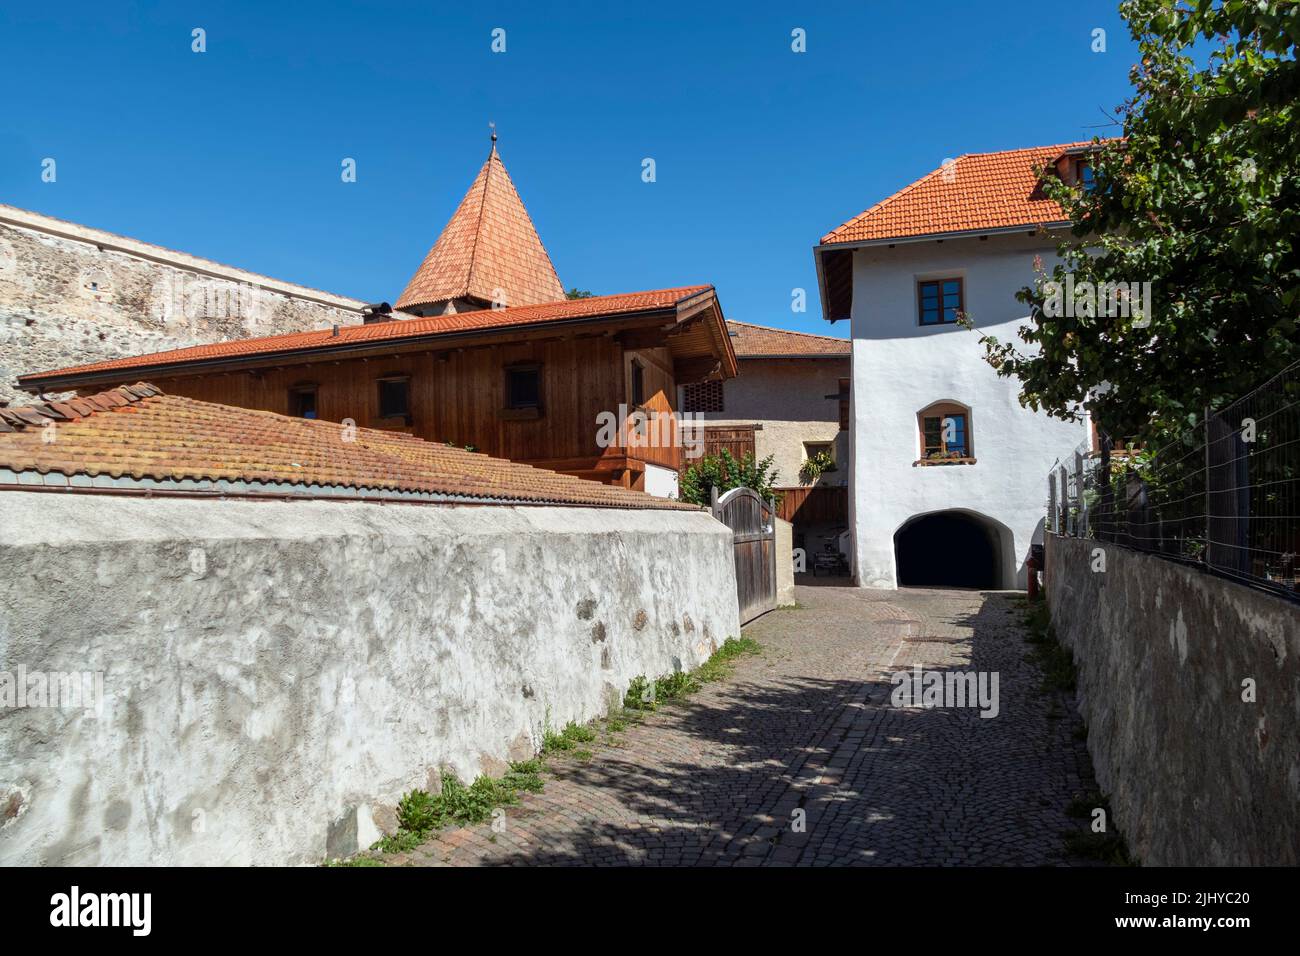 Historic houses with city walls in the background, Glurns/Glorenza, a medieval town, Trentino-Alto Adige, South Tyrol, Italy. Stock Photo